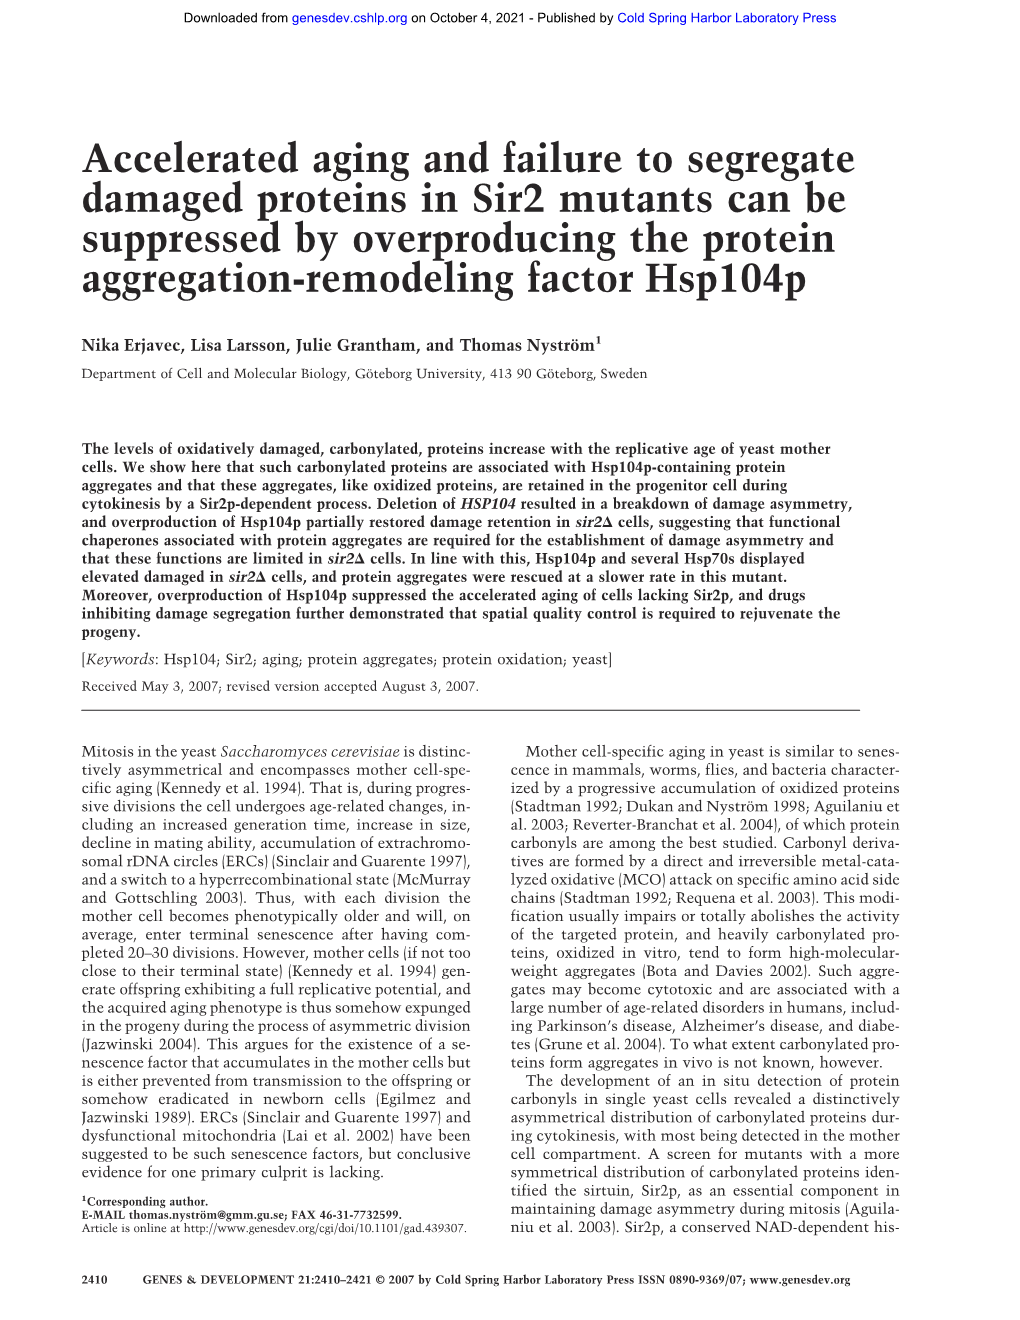 Accelerated Aging and Failure to Segregate Damaged Proteins in Sir2 Mutants Can Be Suppressed by Overproducing the Protein Aggregation-Remodeling Factor Hsp104p